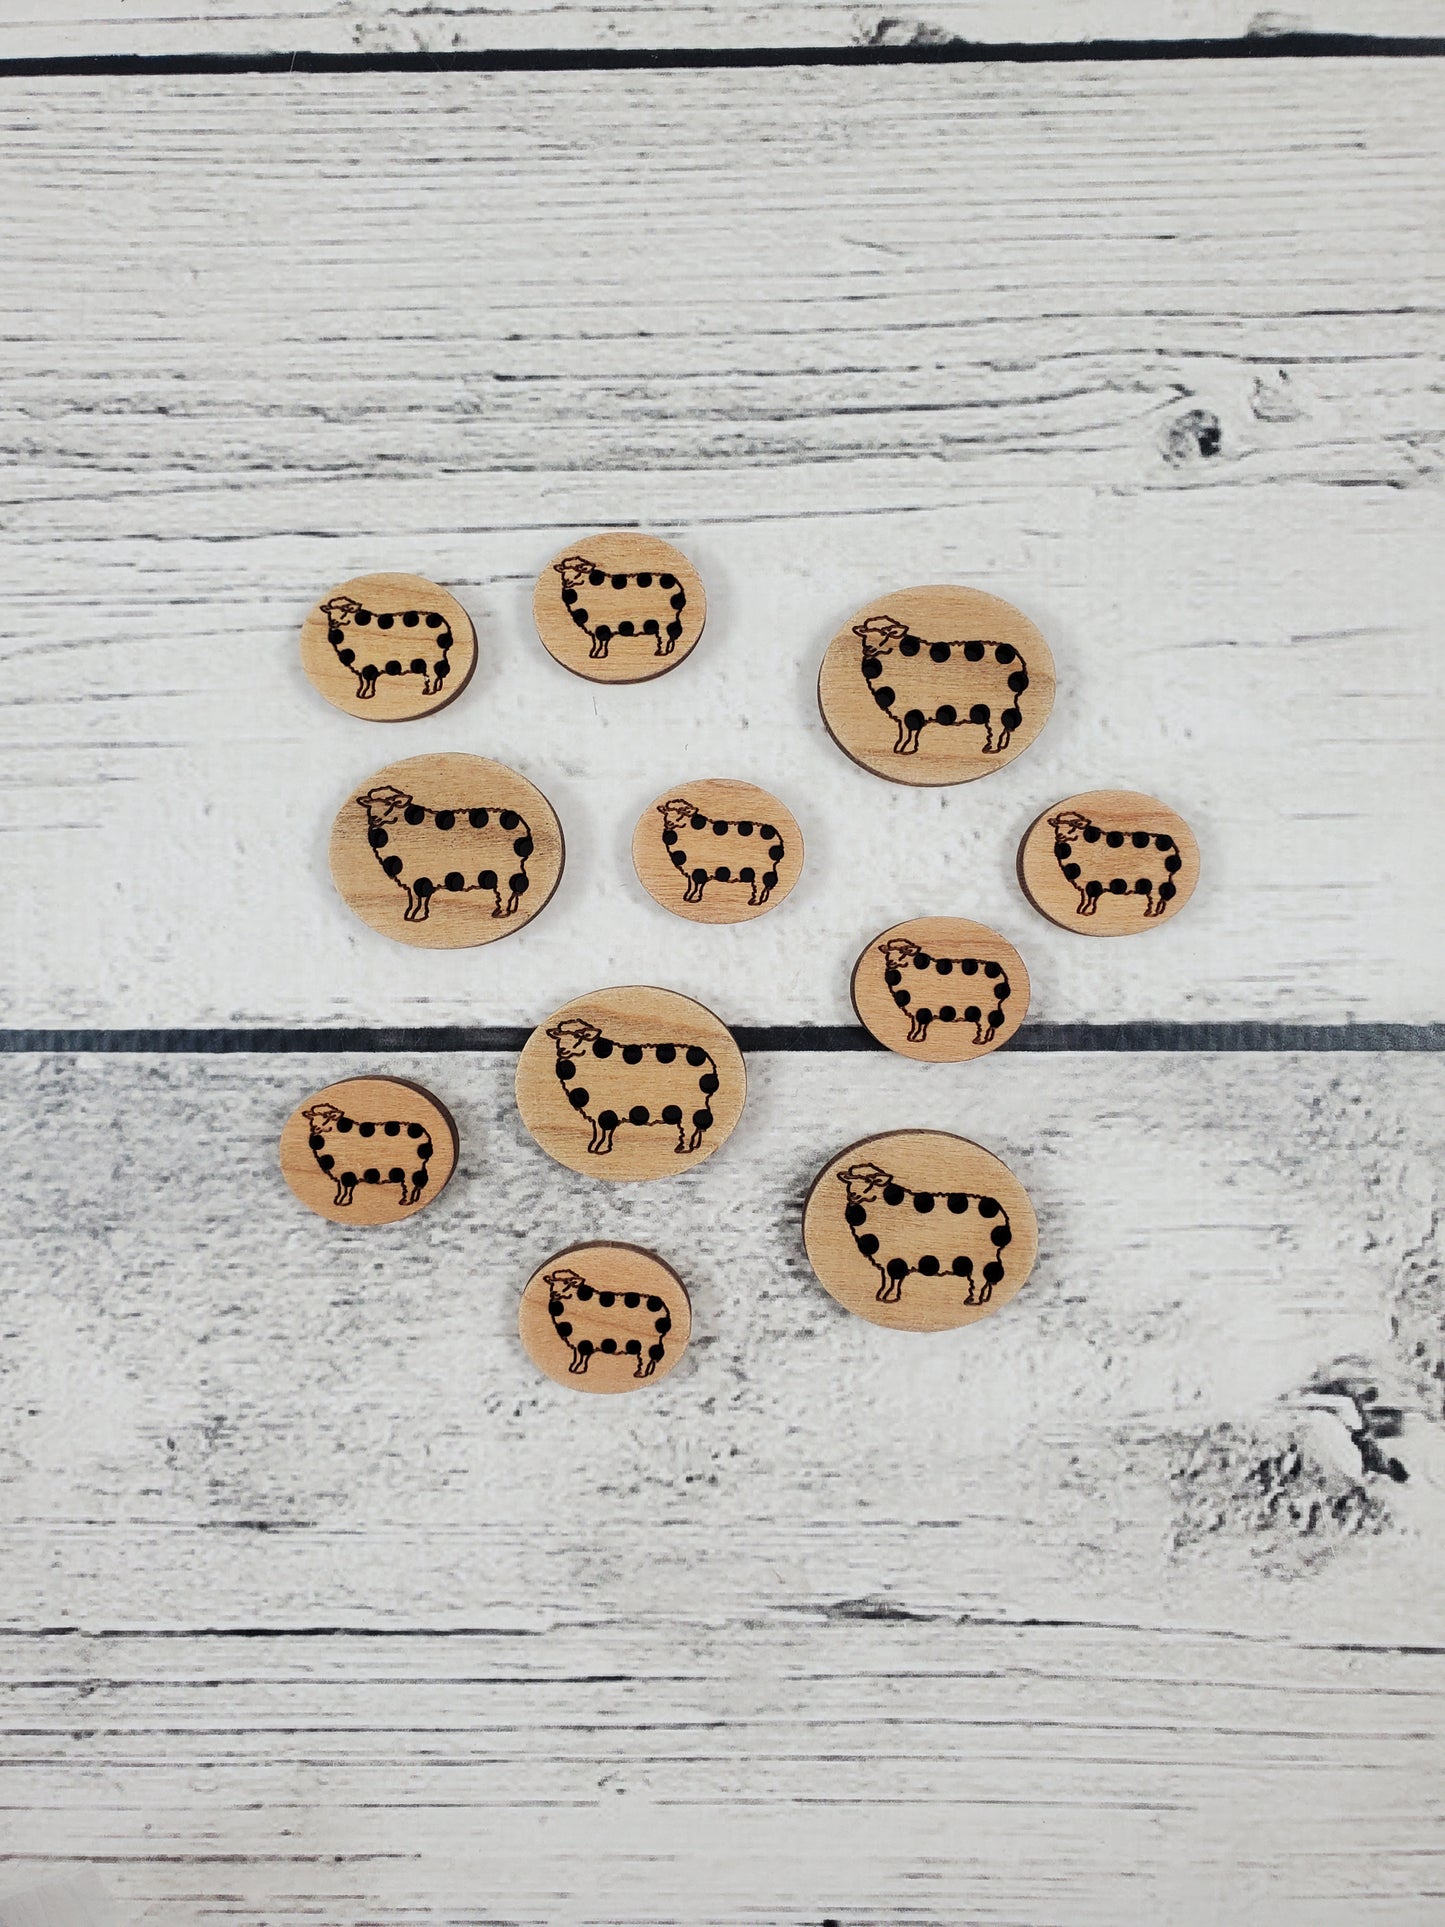 Stitchable Sheep Buttons